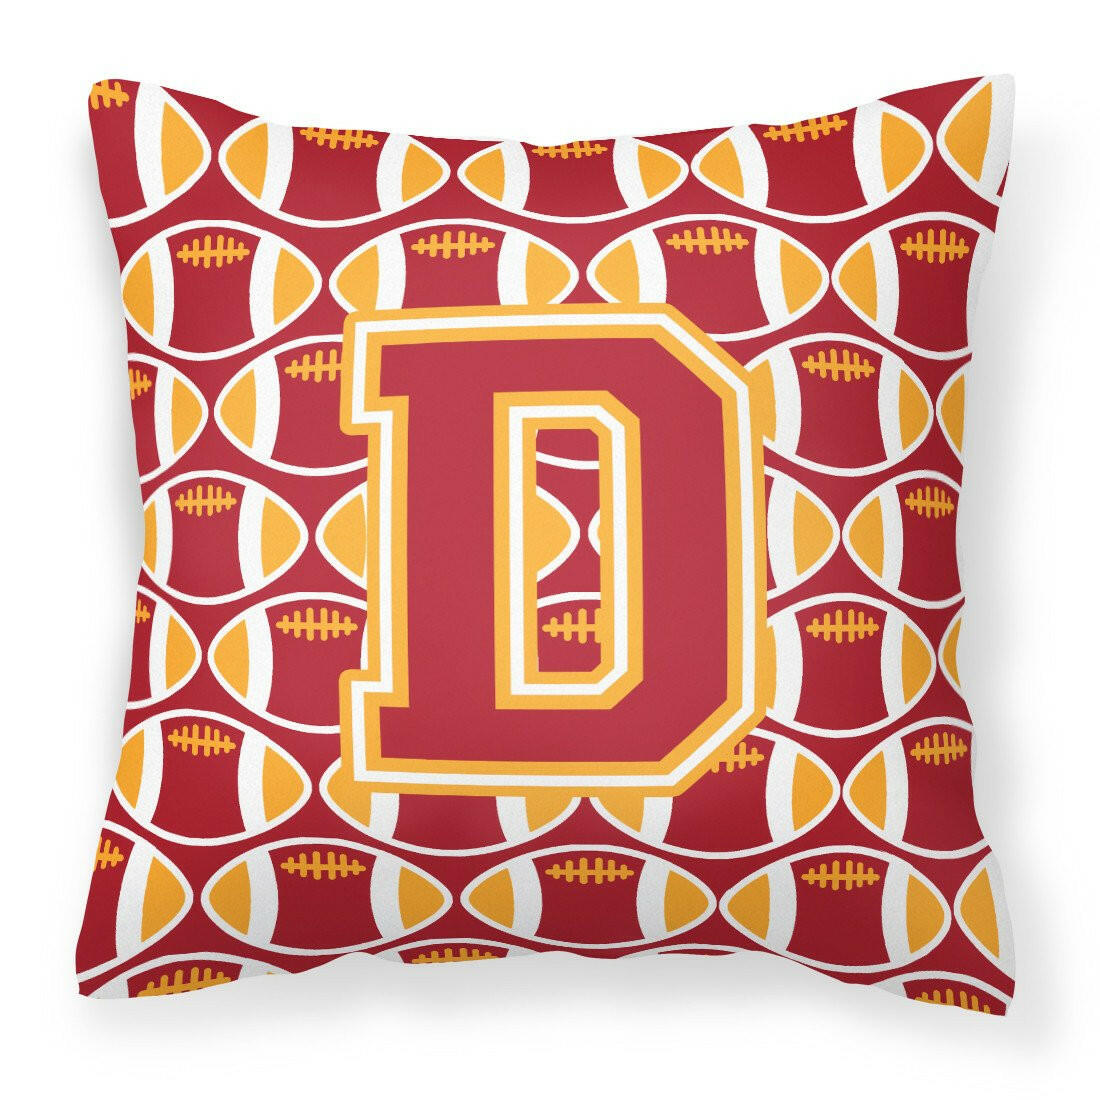 Letter D Football Cardinal and Gold Fabric Decorative Pillow CJ1070-DPW1414 by Caroline's Treasures